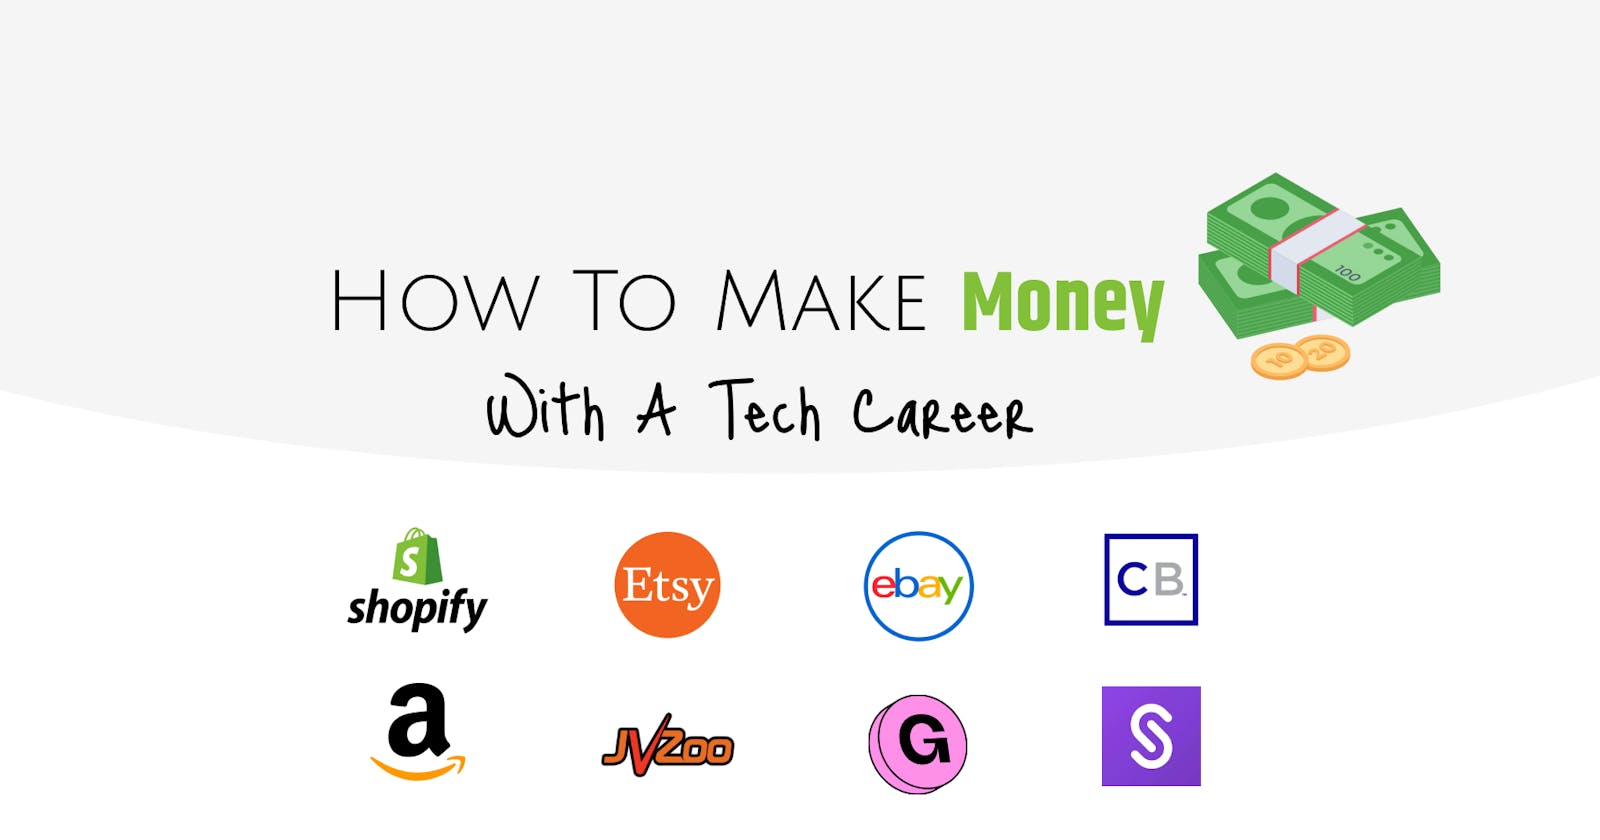 How to Make Money With a Tech Career